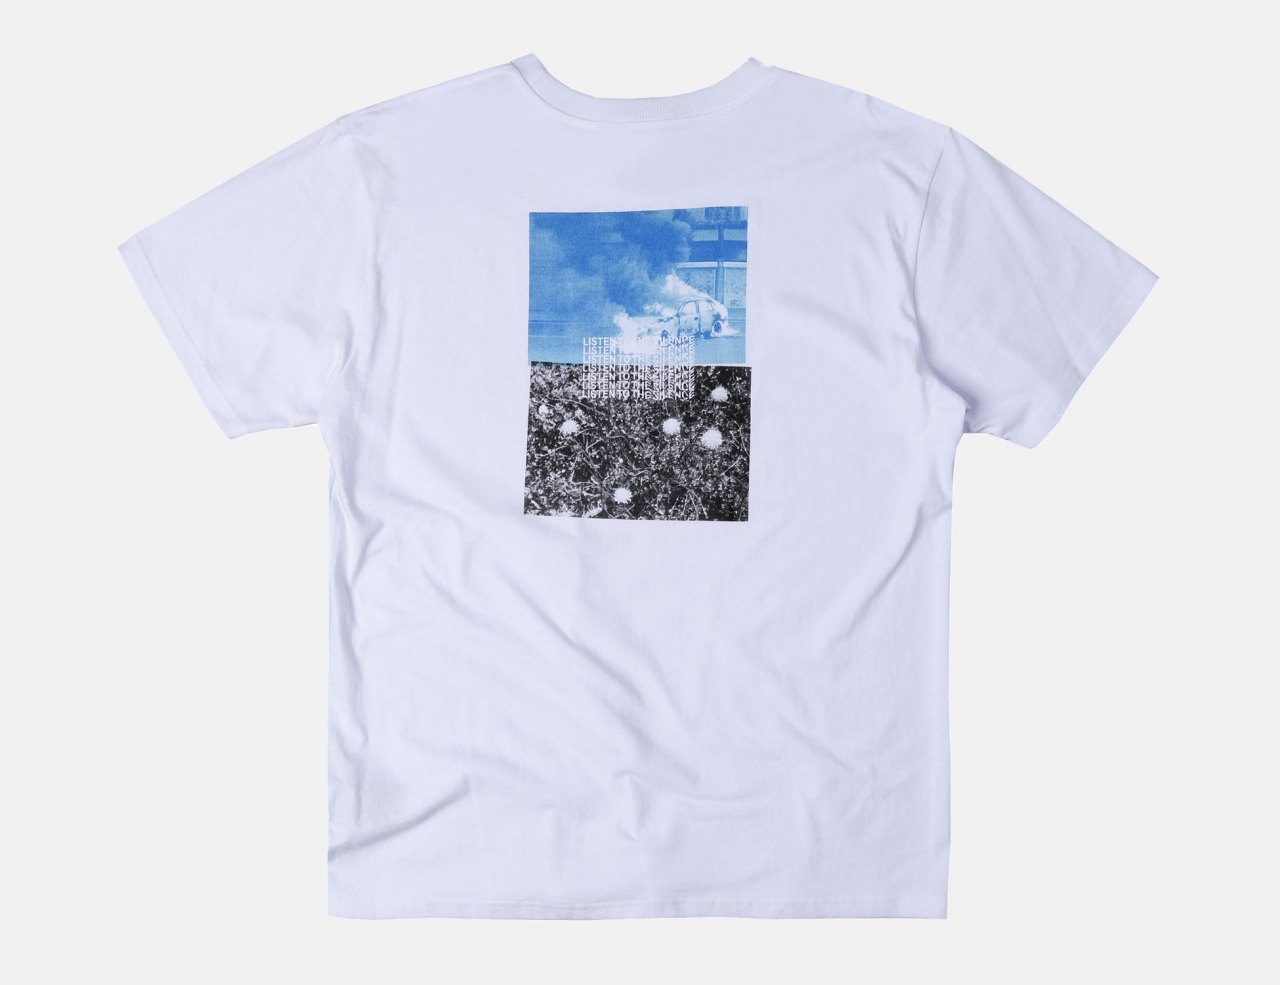 Former Complexion T-Shirt - White